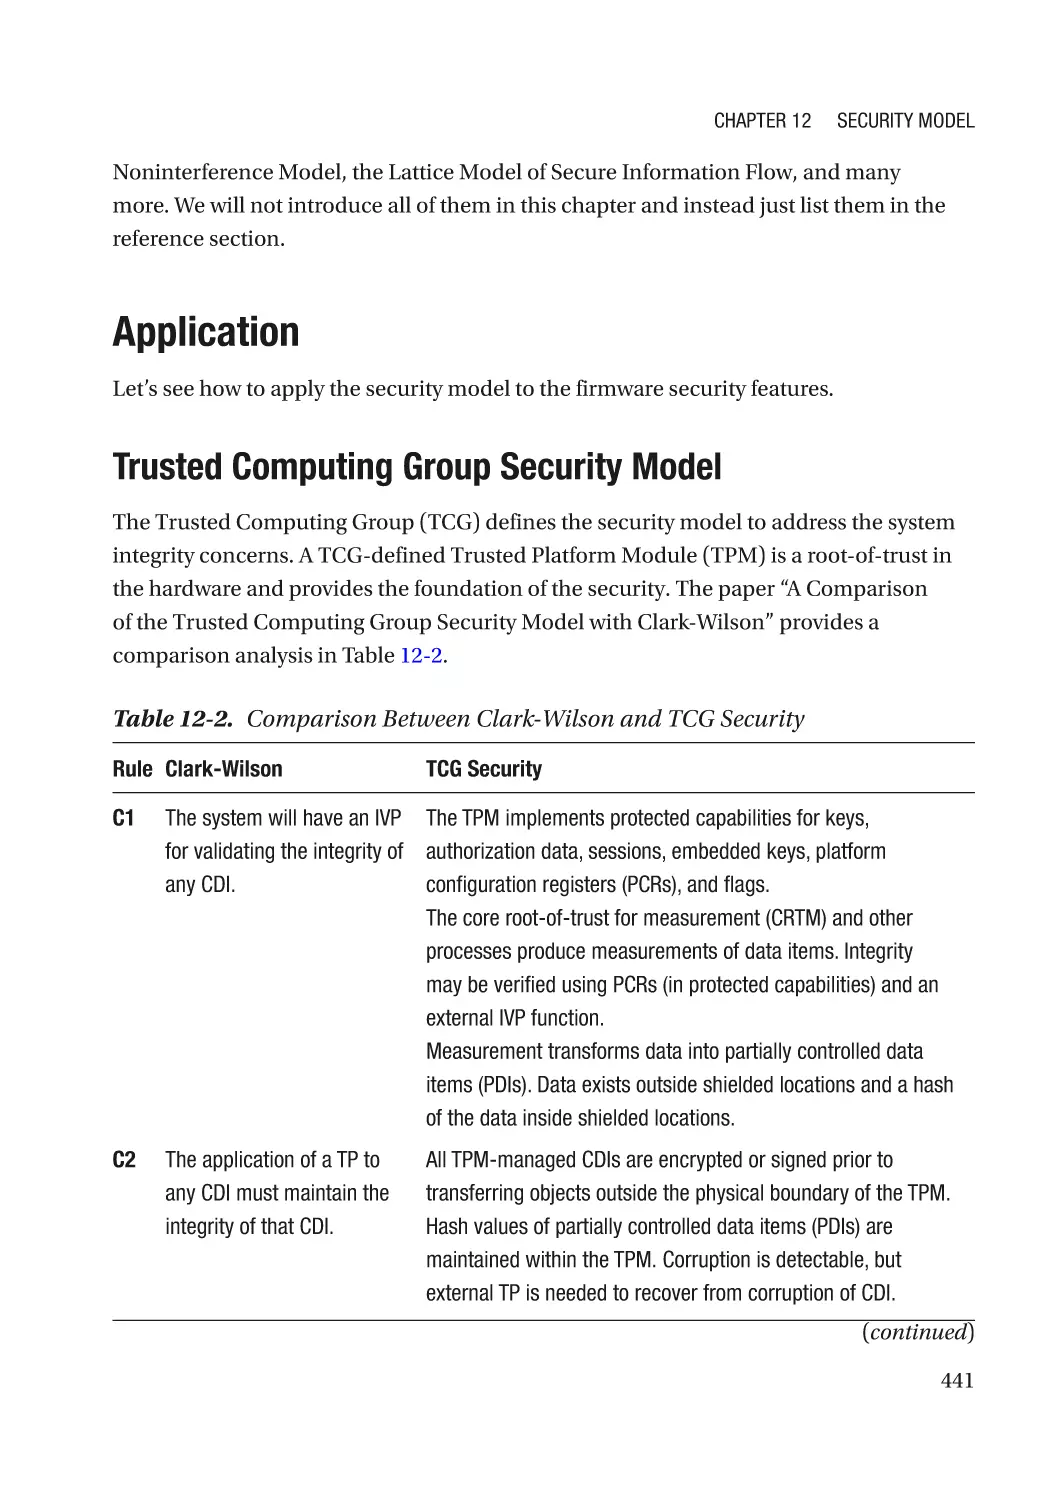 Application
Trusted Computing Group Security Model